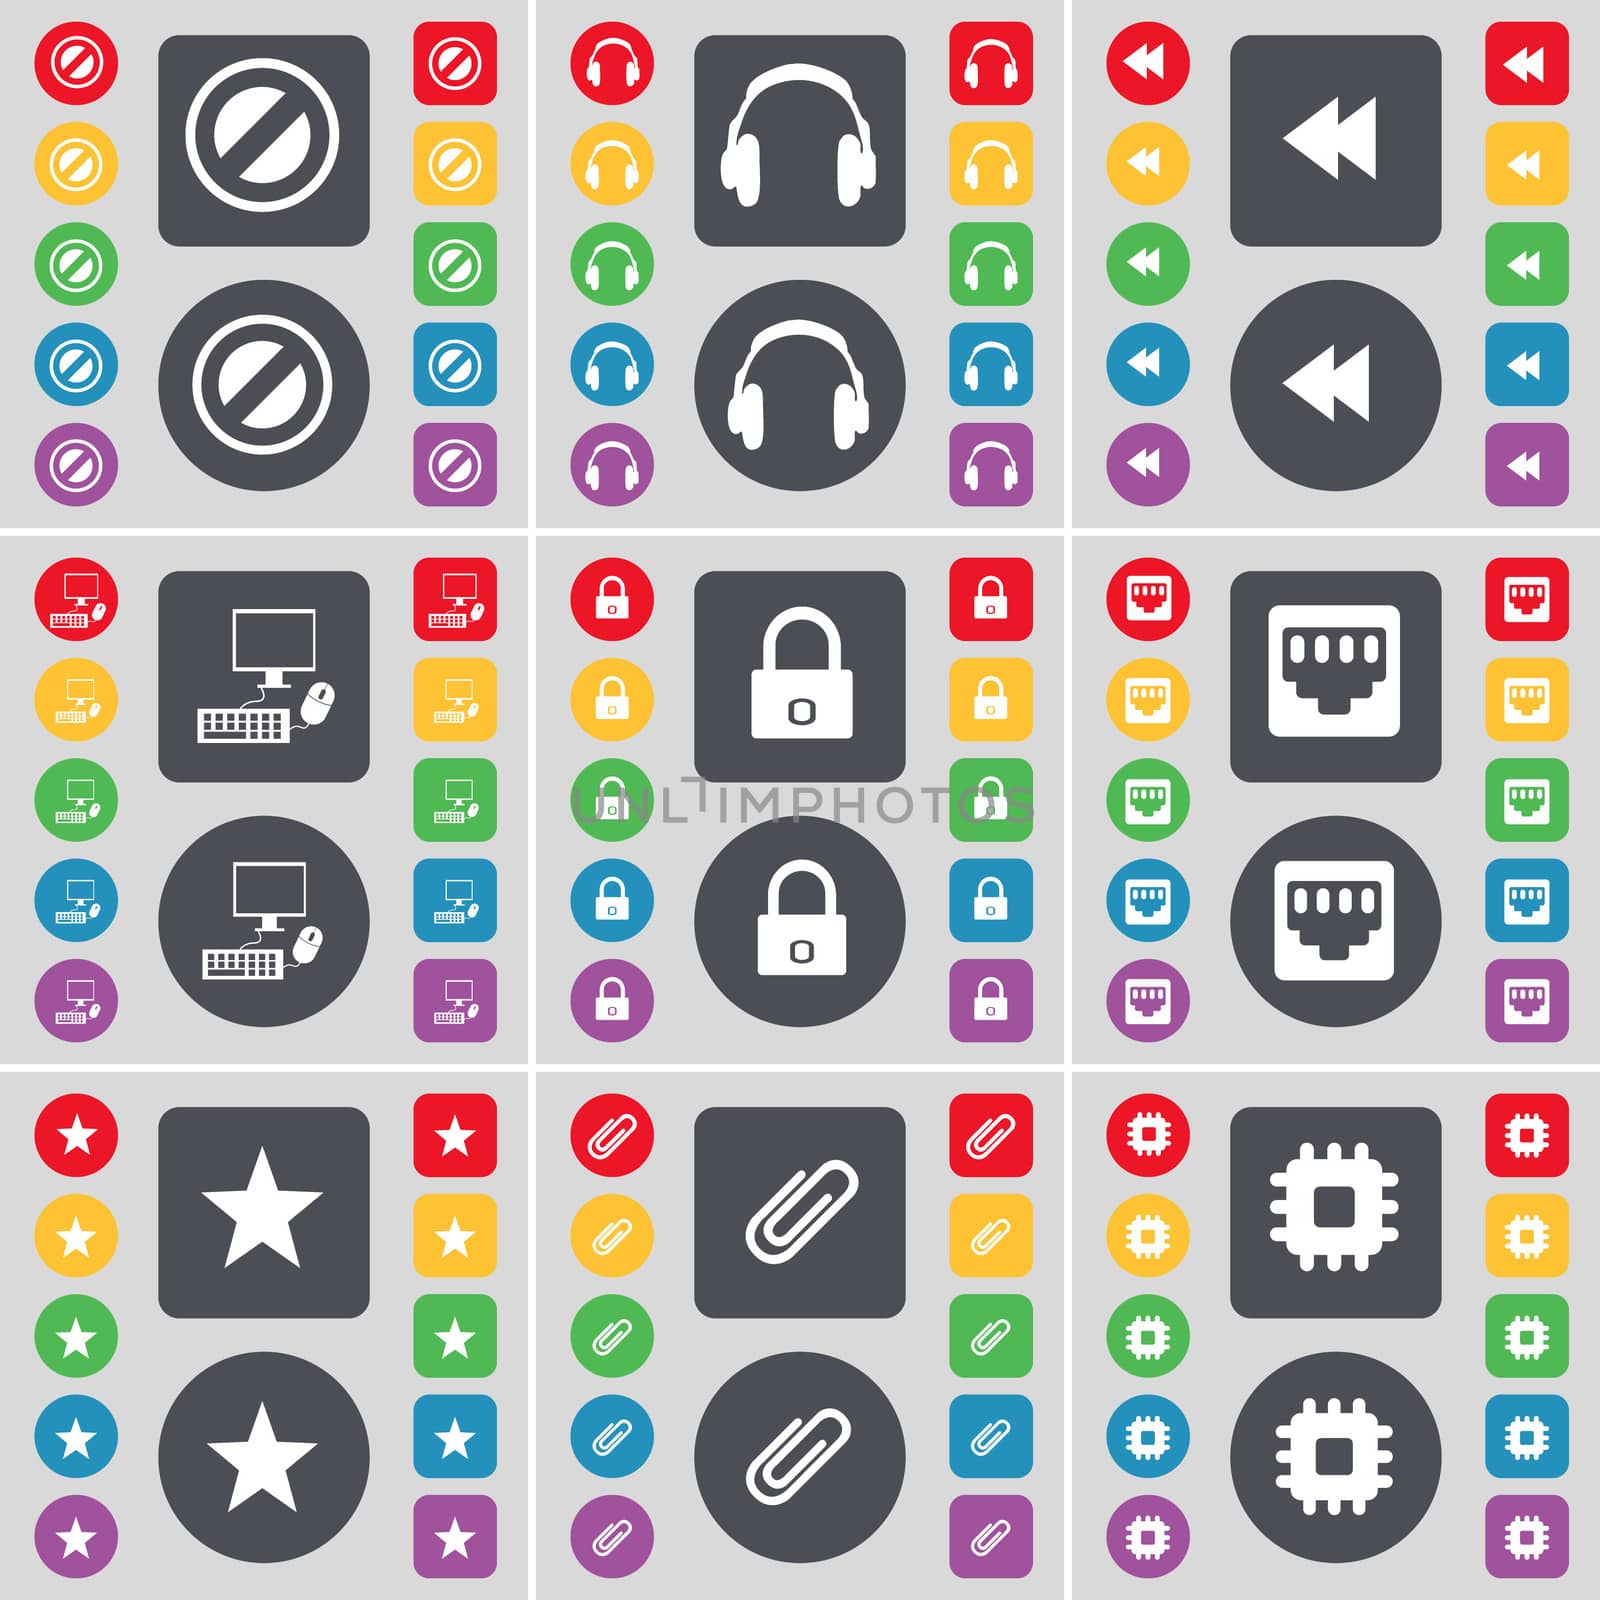 Stop, Headphones, Rewind, PC, Lock, LAN socket, Star, Clip, Processor icon symbol. A large set of flat, colored buttons for your design. illustration